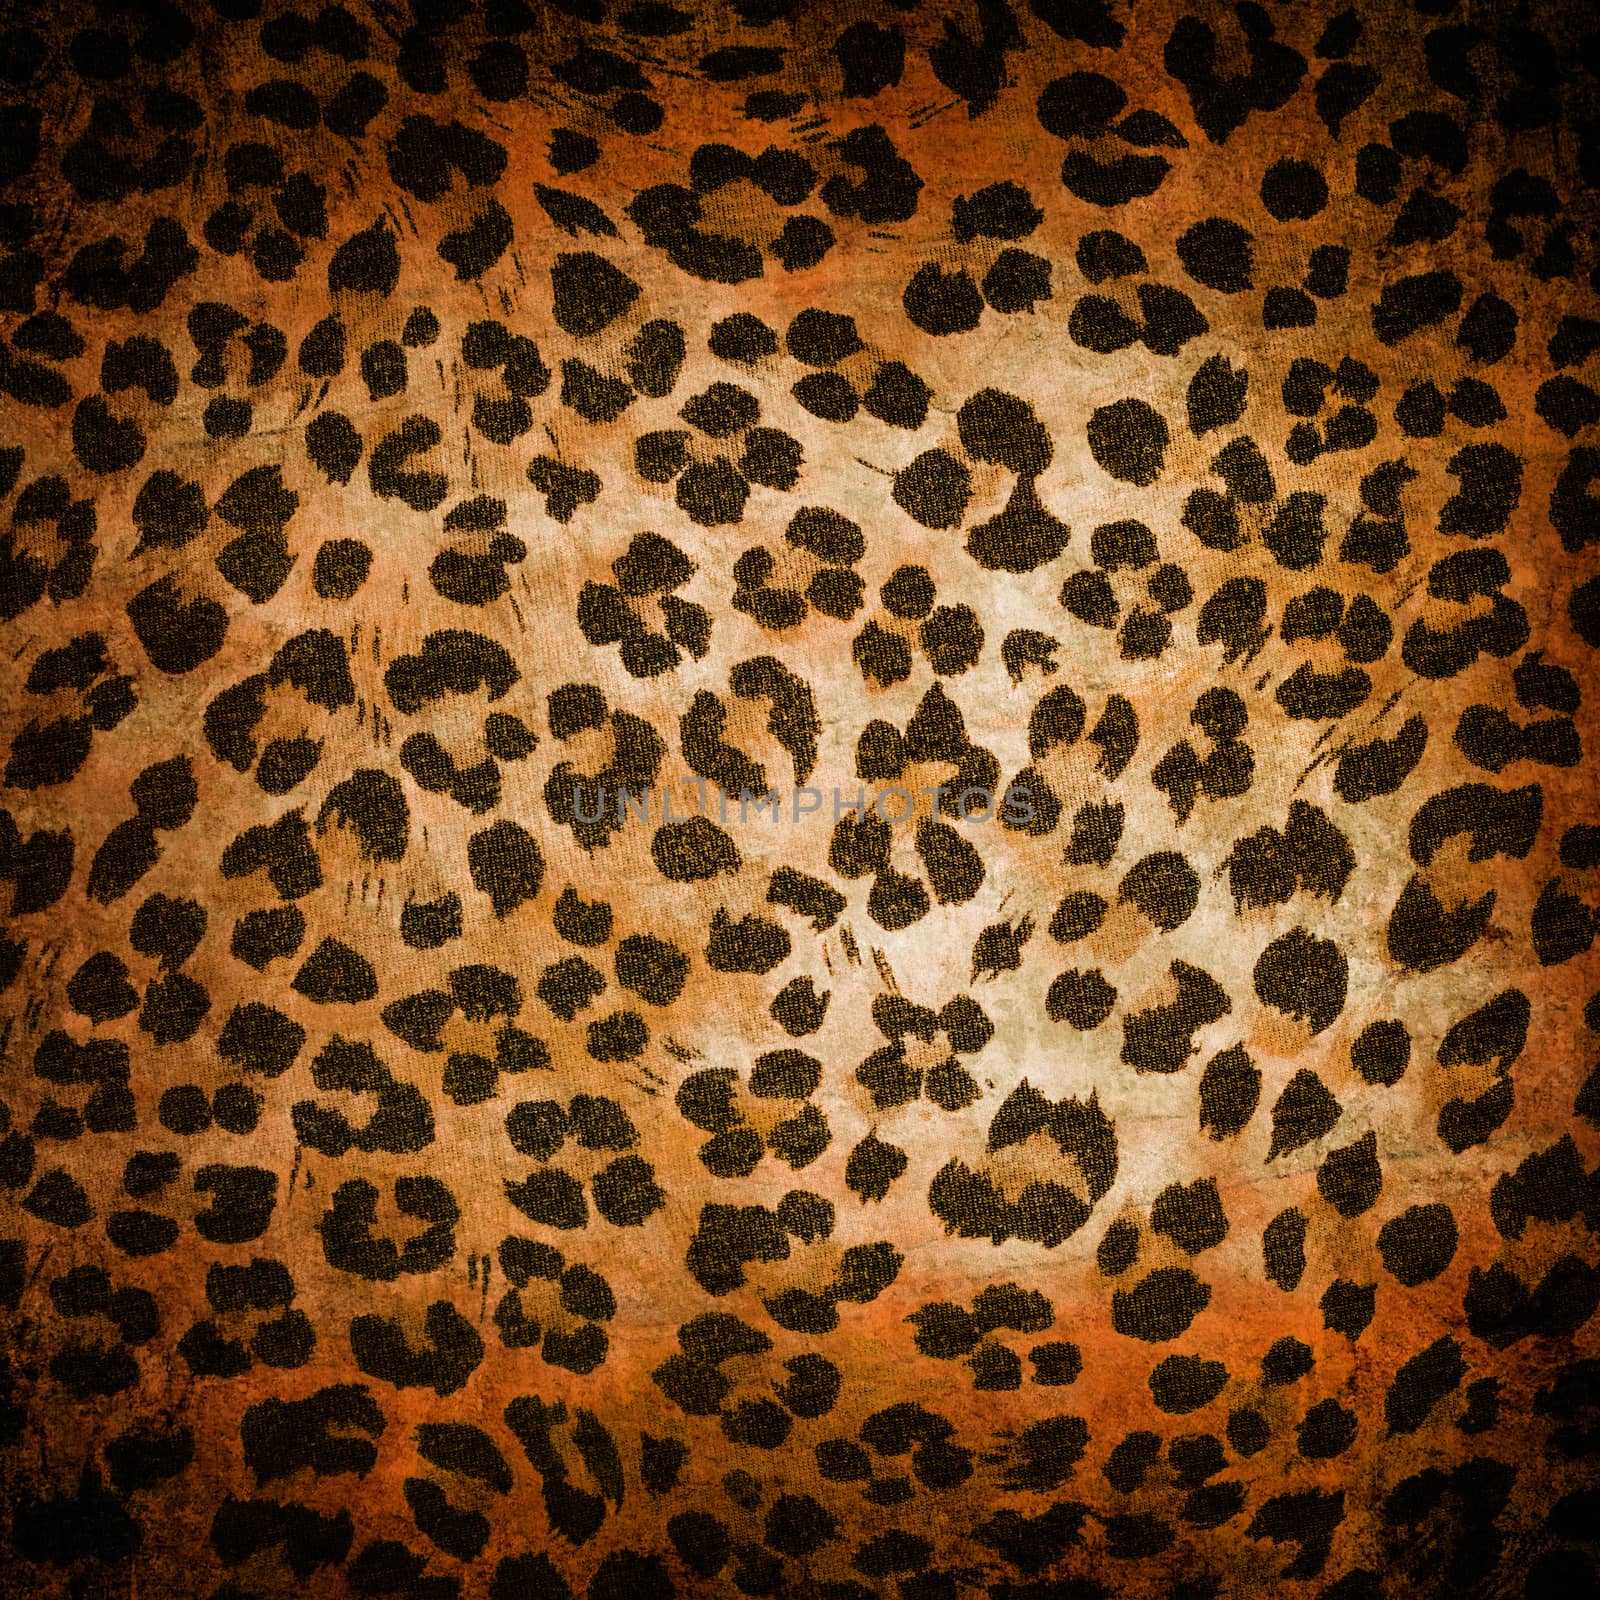 Wild animal pattern background or texture close up